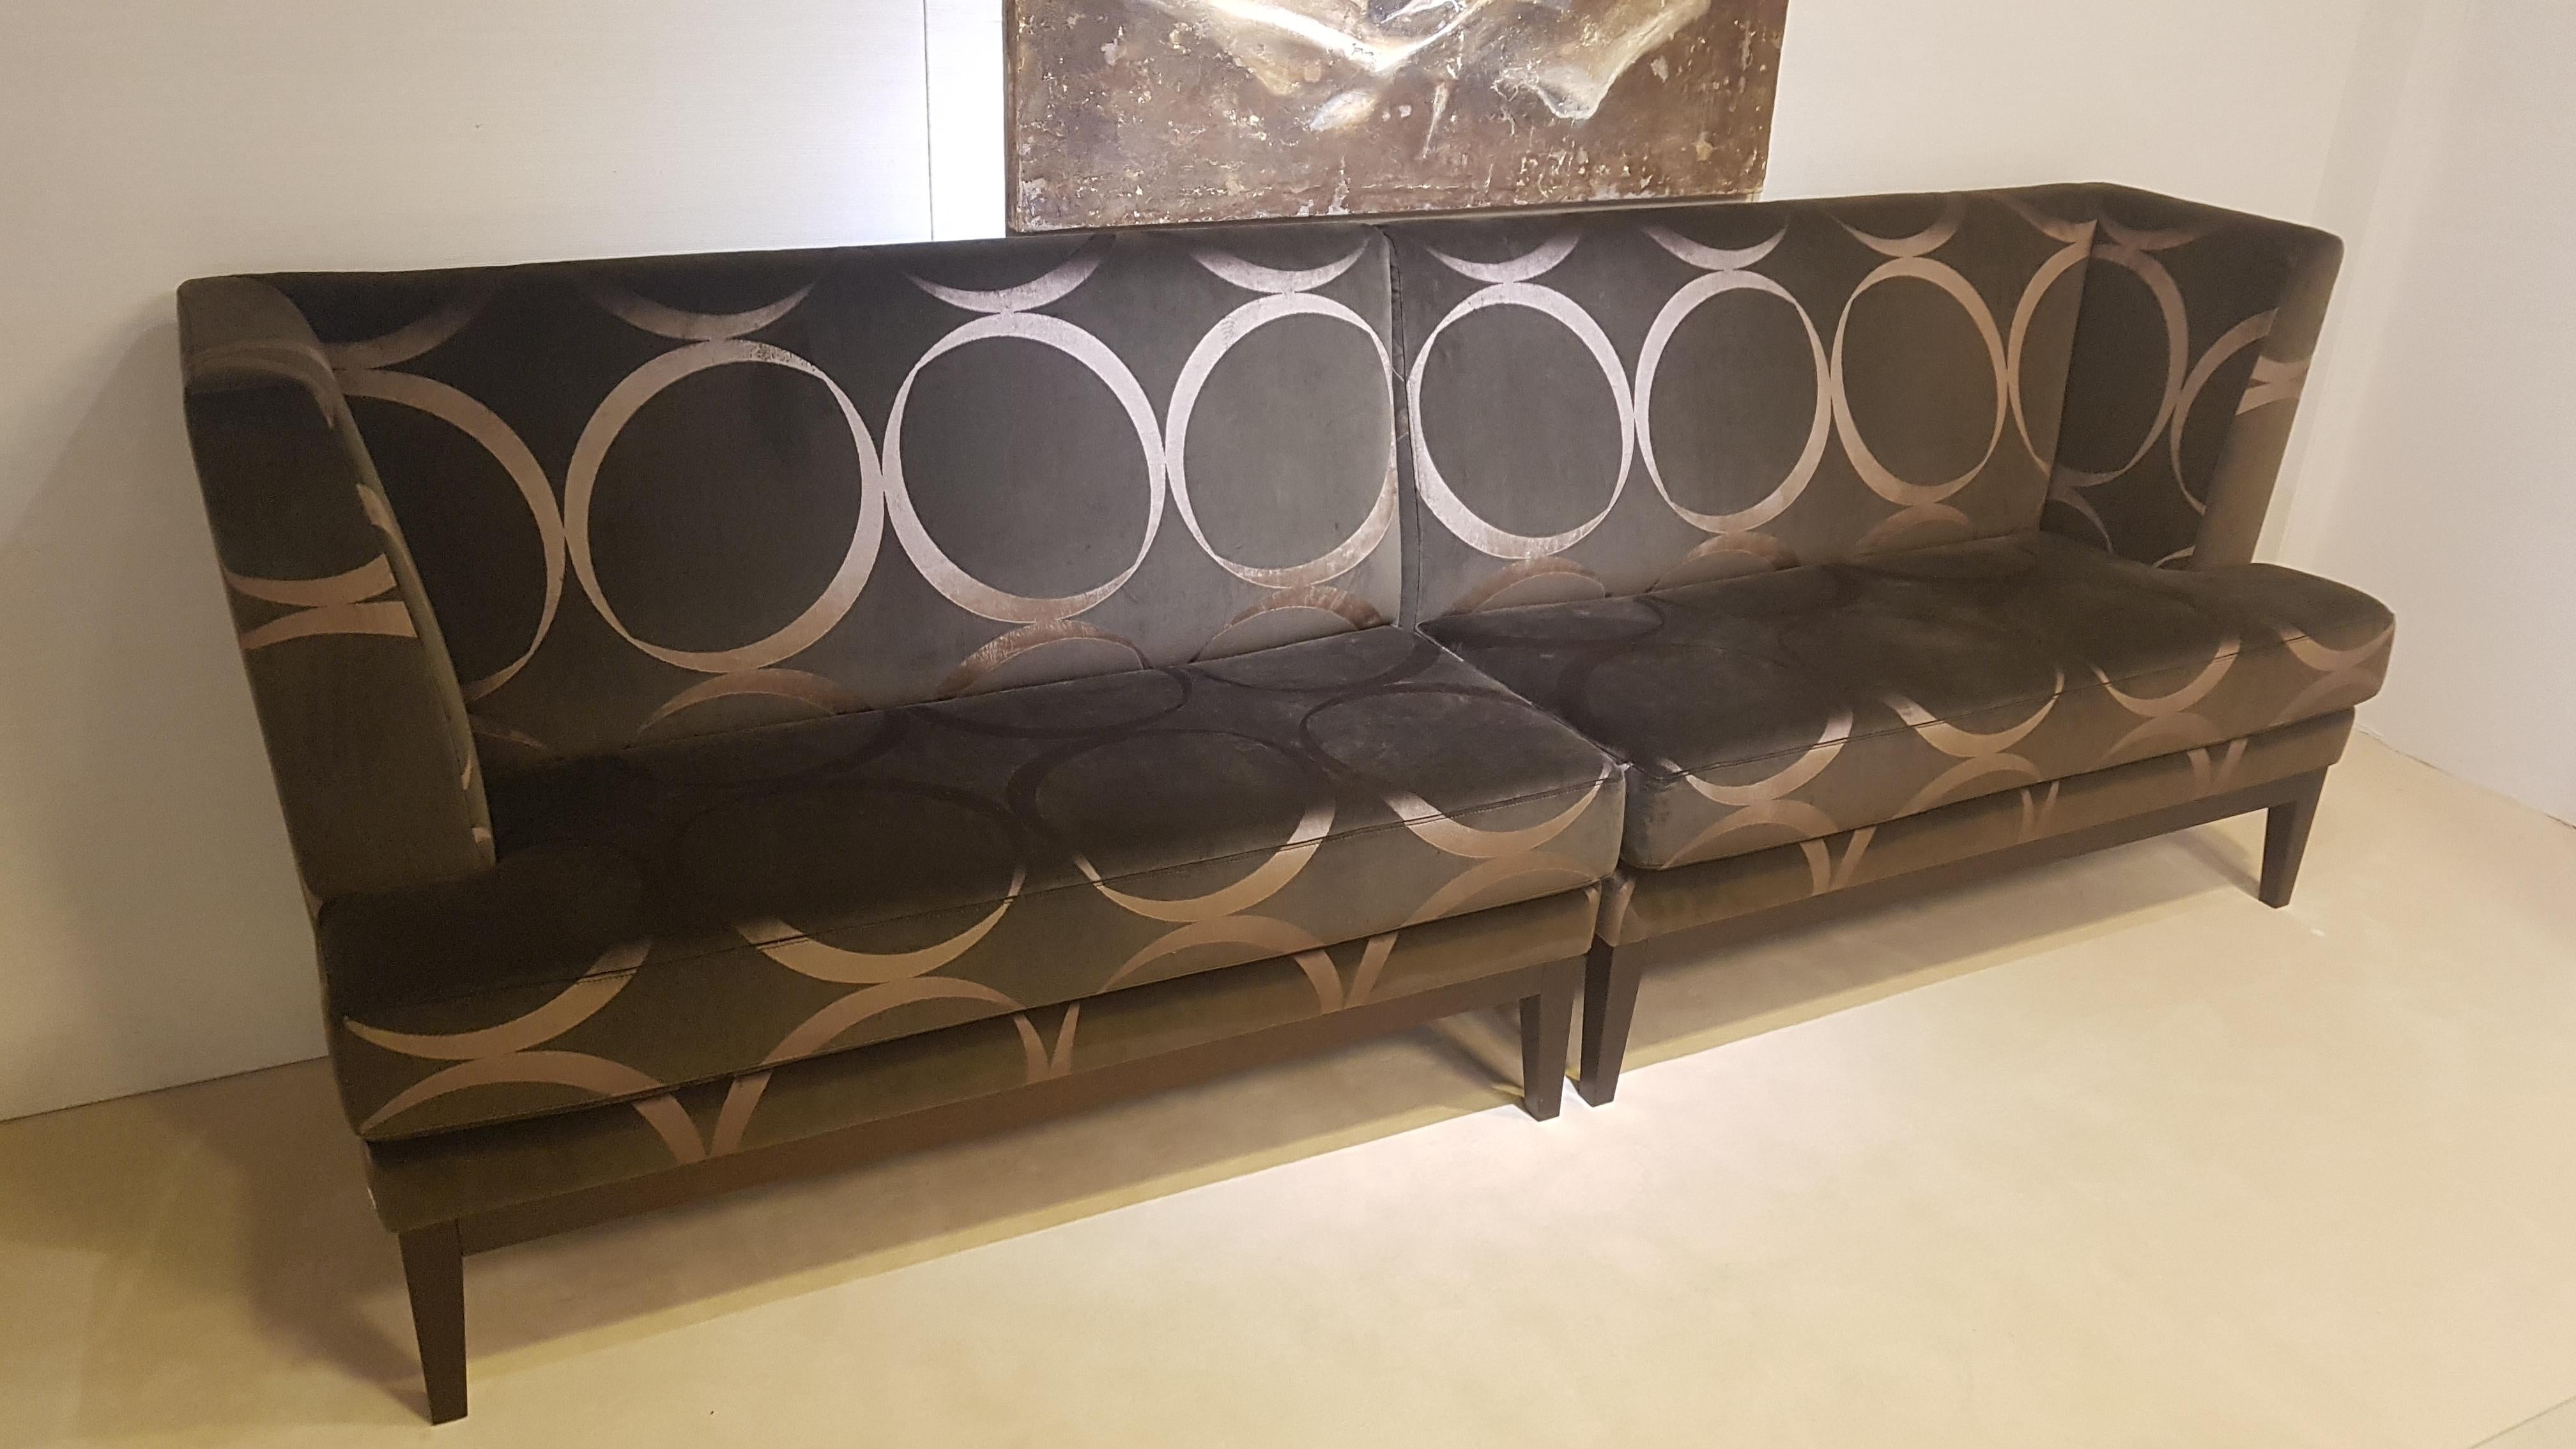 A luxurious pair of modern design benches covered with a high end velor fabric. They feature an elegant and shiny gold and brown color with dark brown wenge wood feet. Symmetrical benches with a cornered backrest on each side. Handmade German